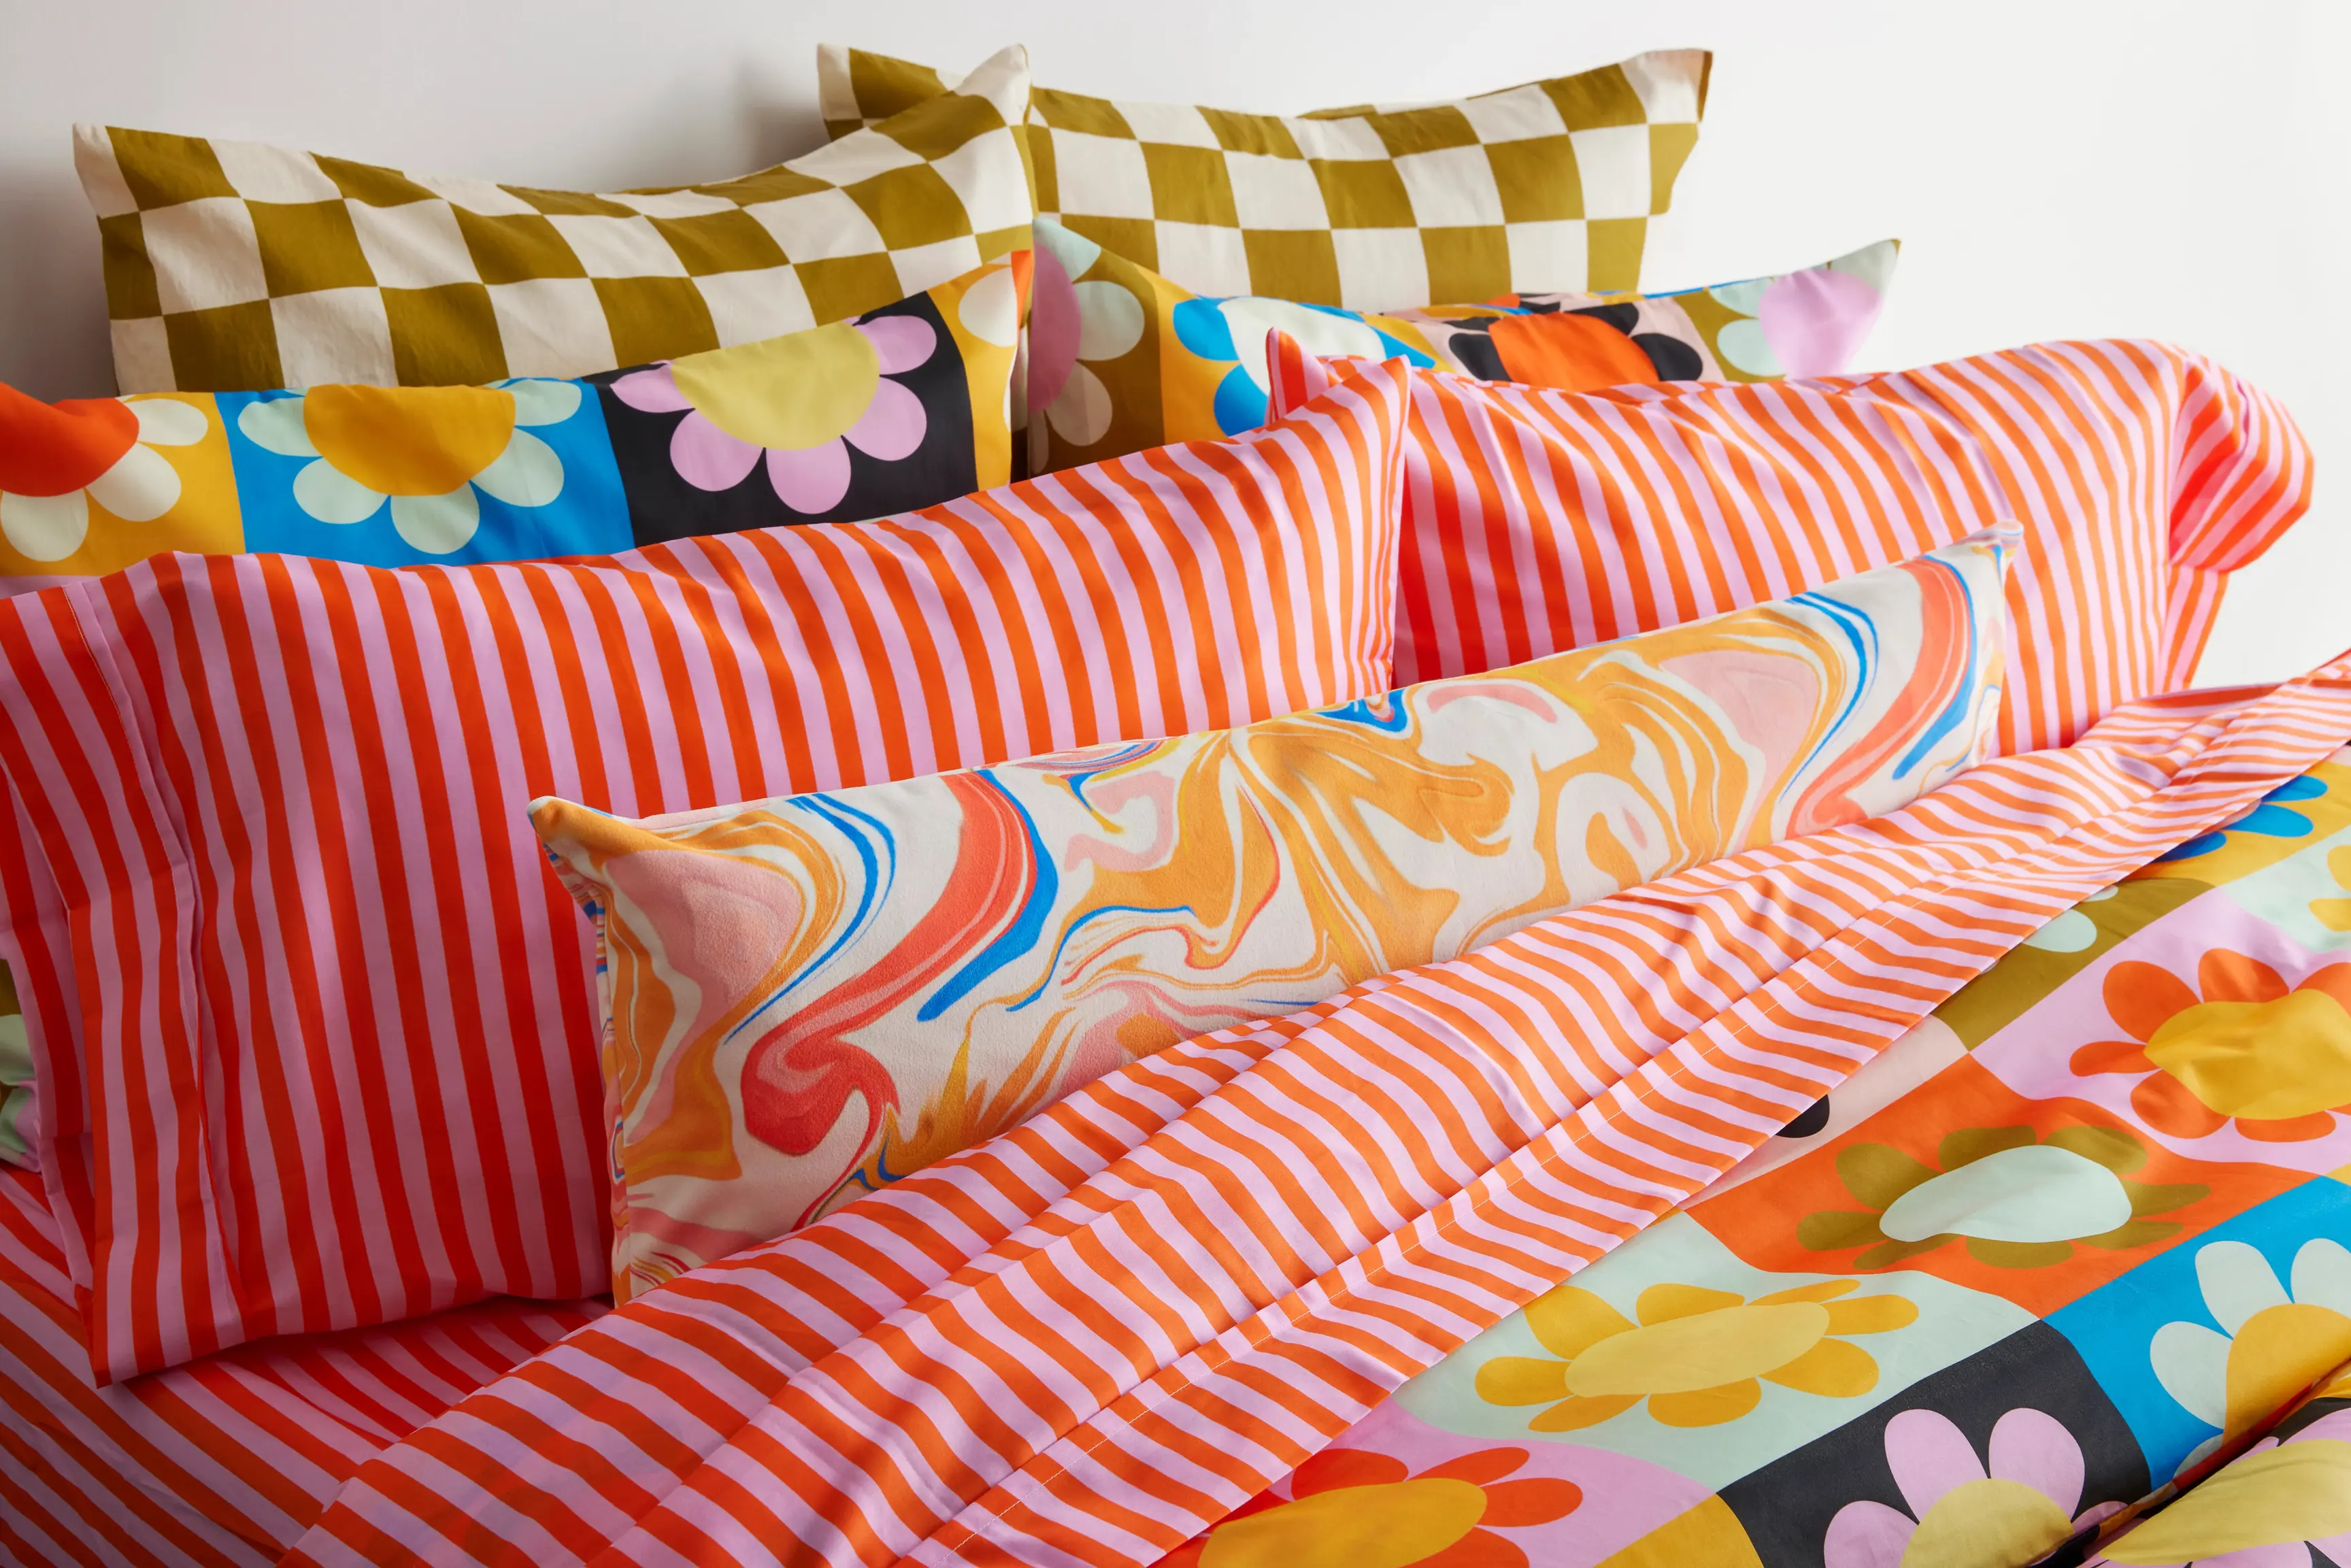 Colorful and cheerful pillow shams